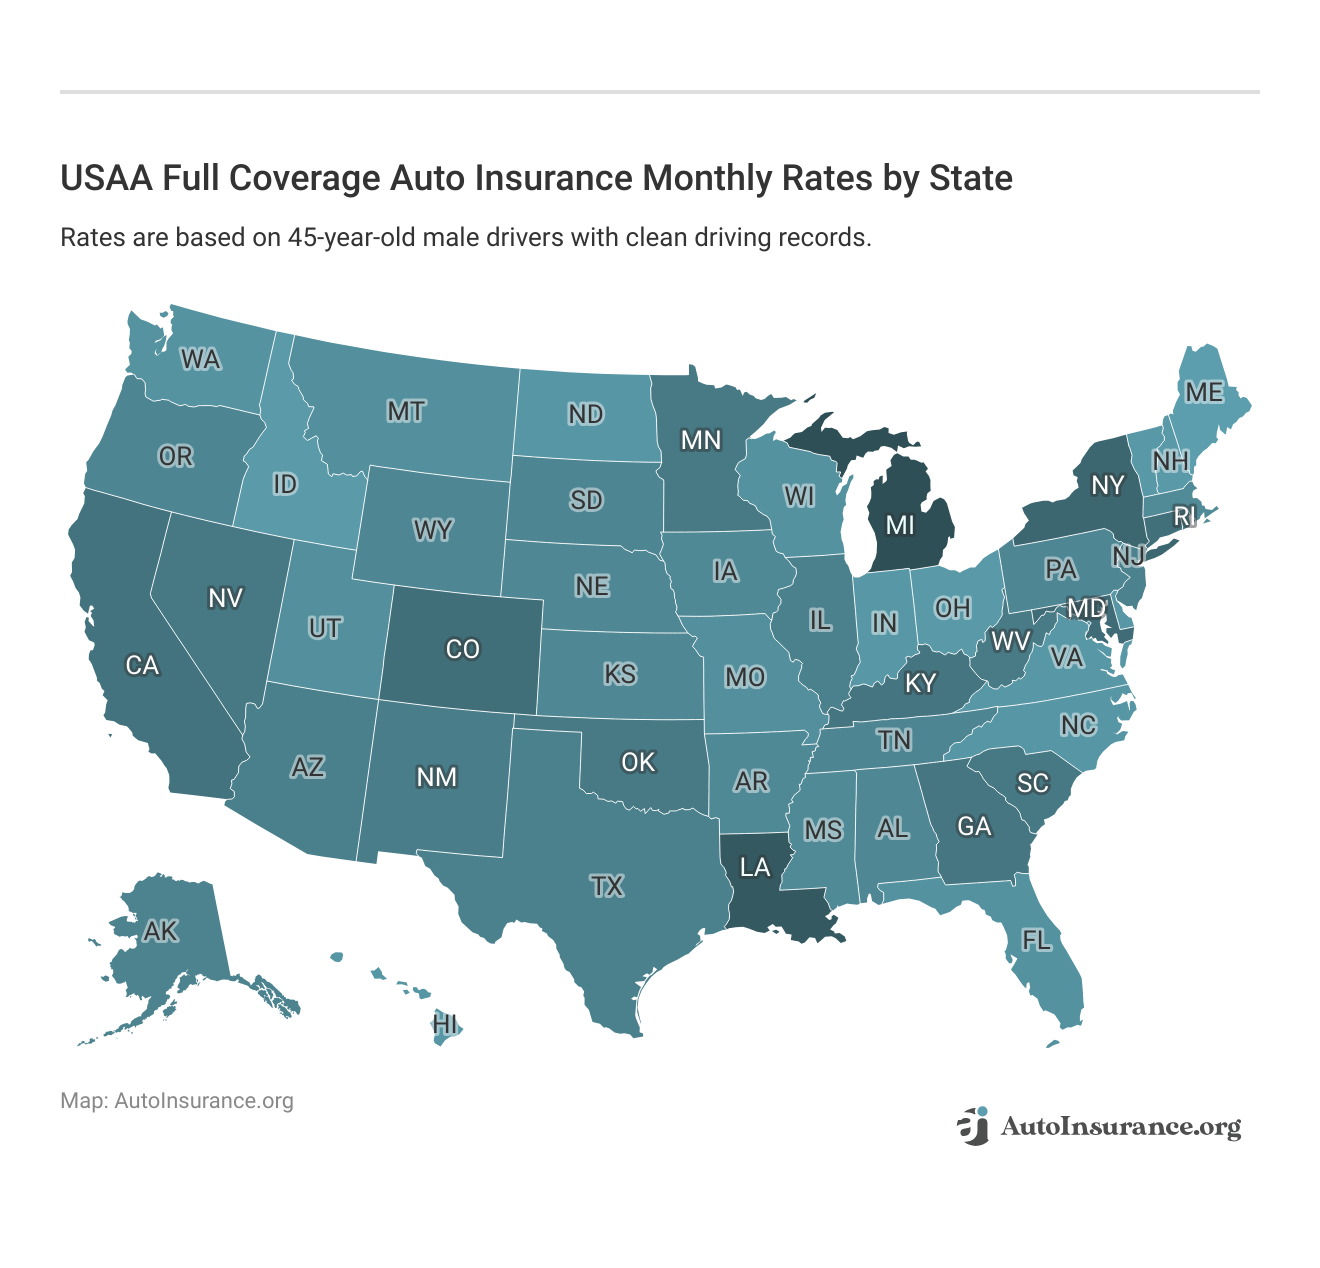 USAA Full Coverage Auto Insurance Monthly Rates by State